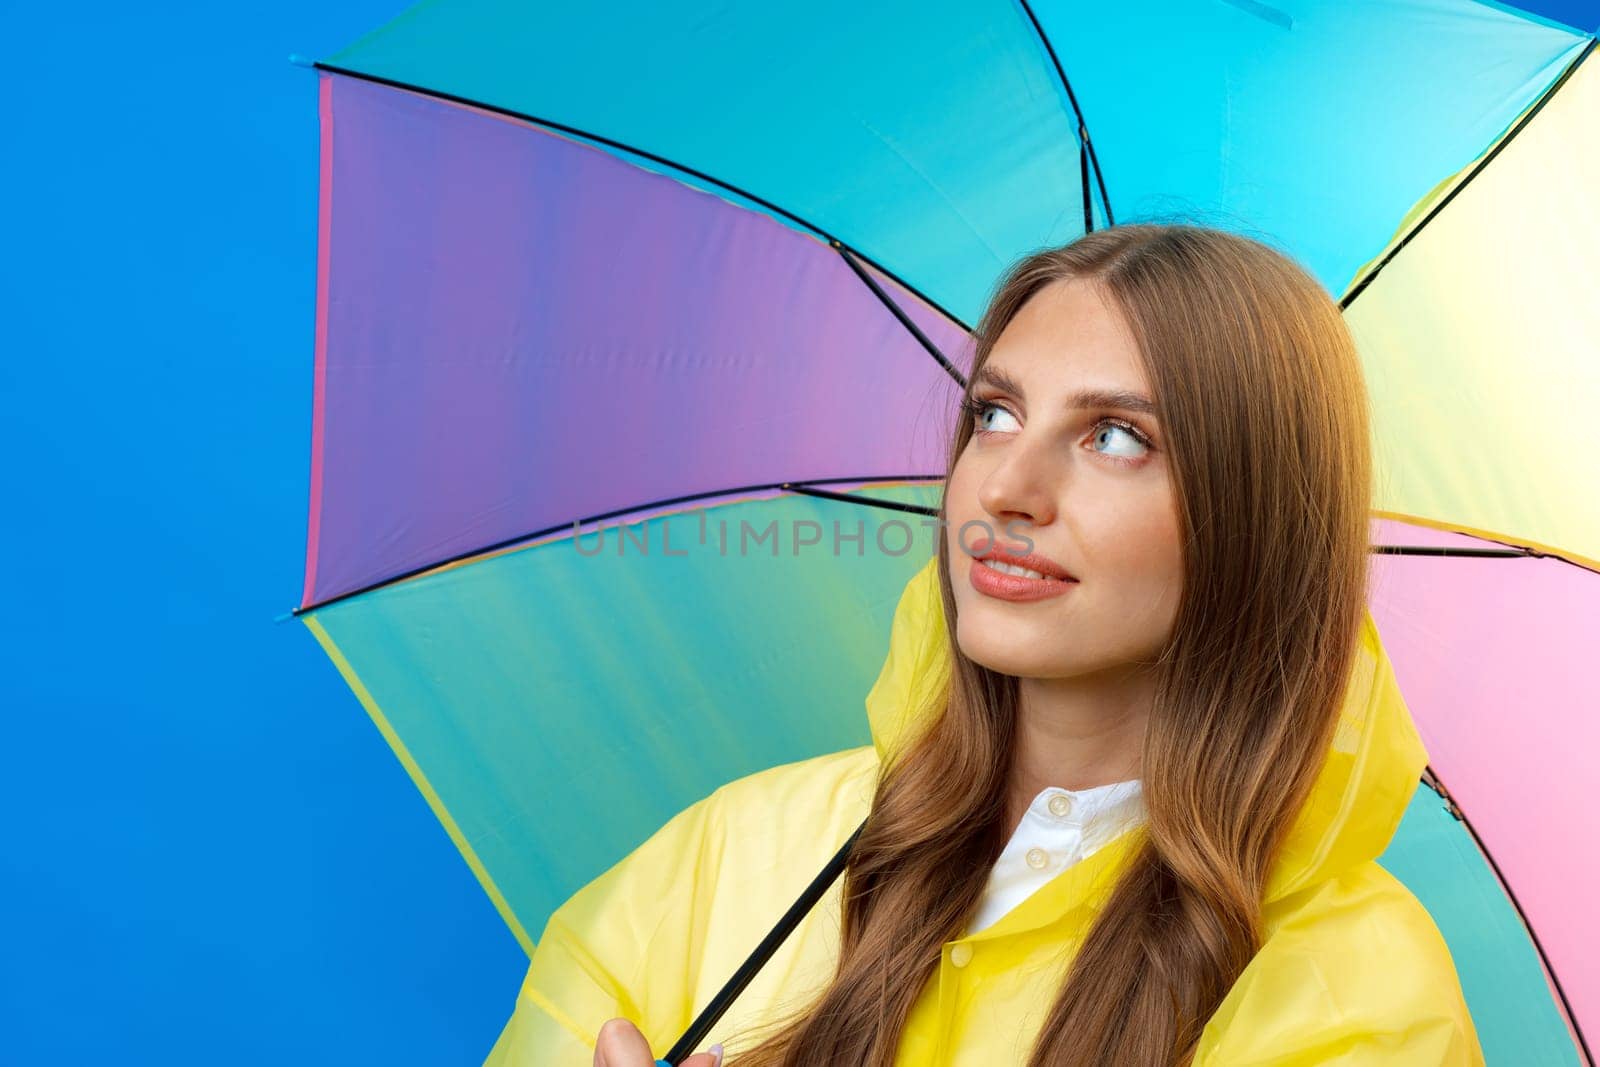 Young woman in yellow raincoat with rainbow umbrella against blue background in studio, close up